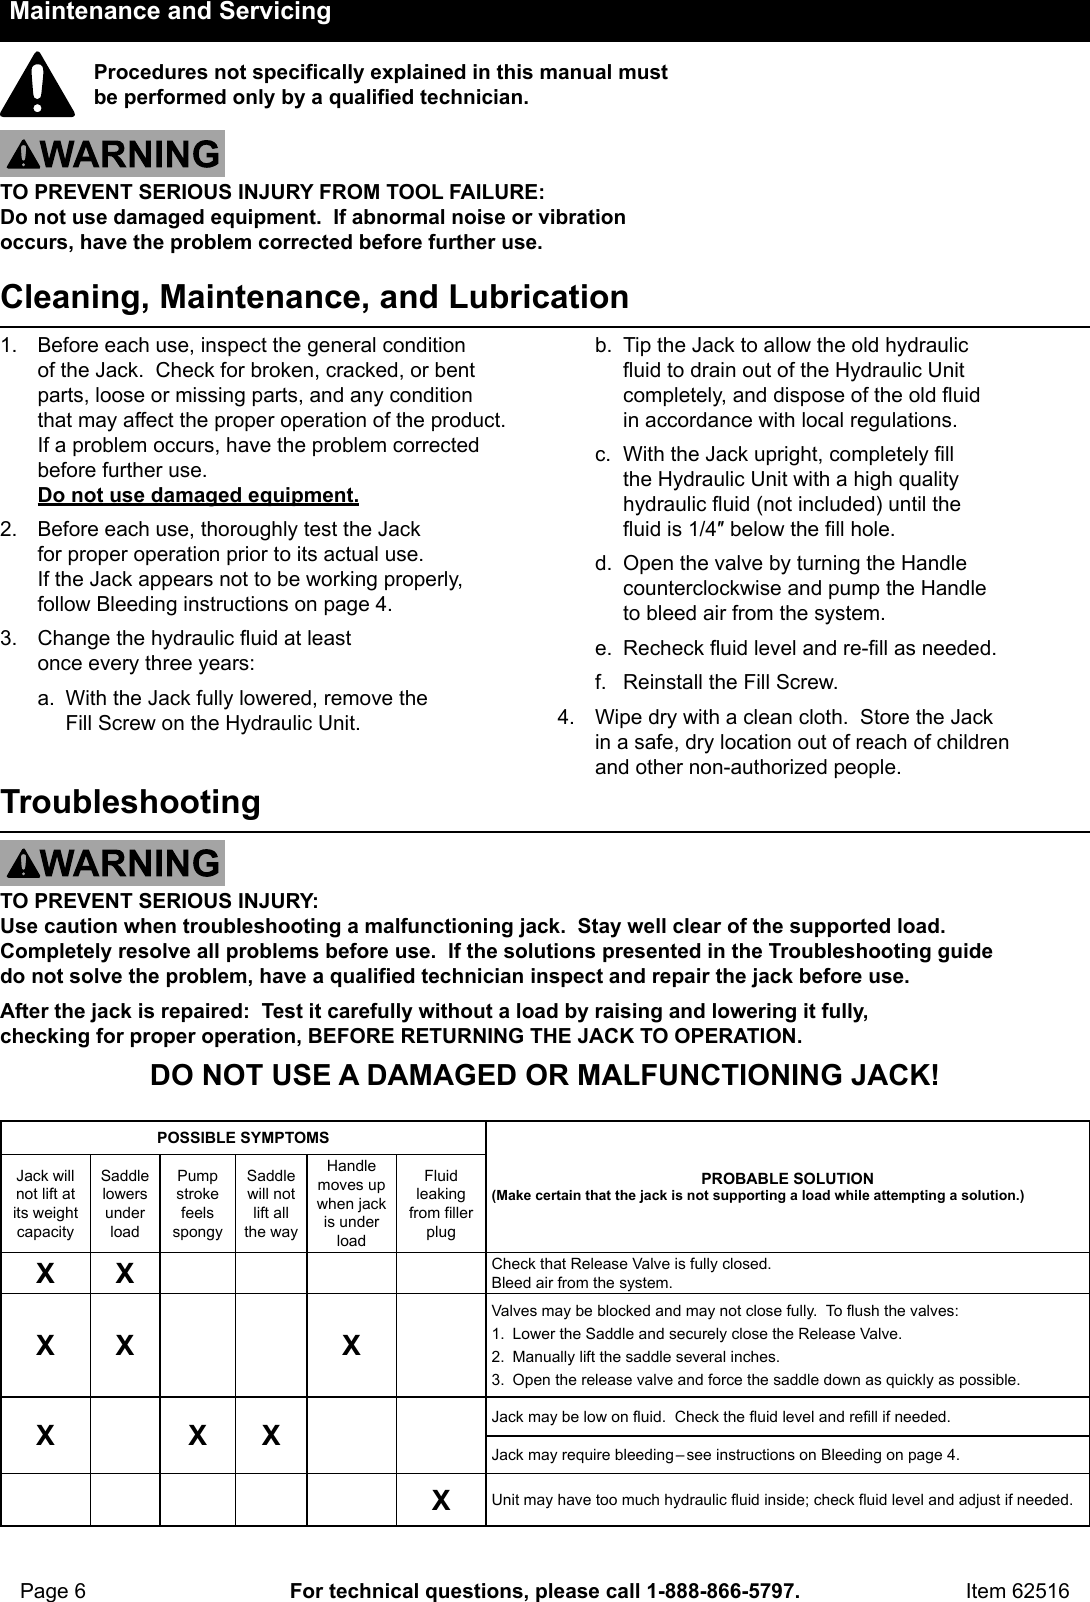 Page 6 of 8 - Manual For The 62516 1.5 Ton Compact Aluminum Racing Floor Jack With Rapid Pump®